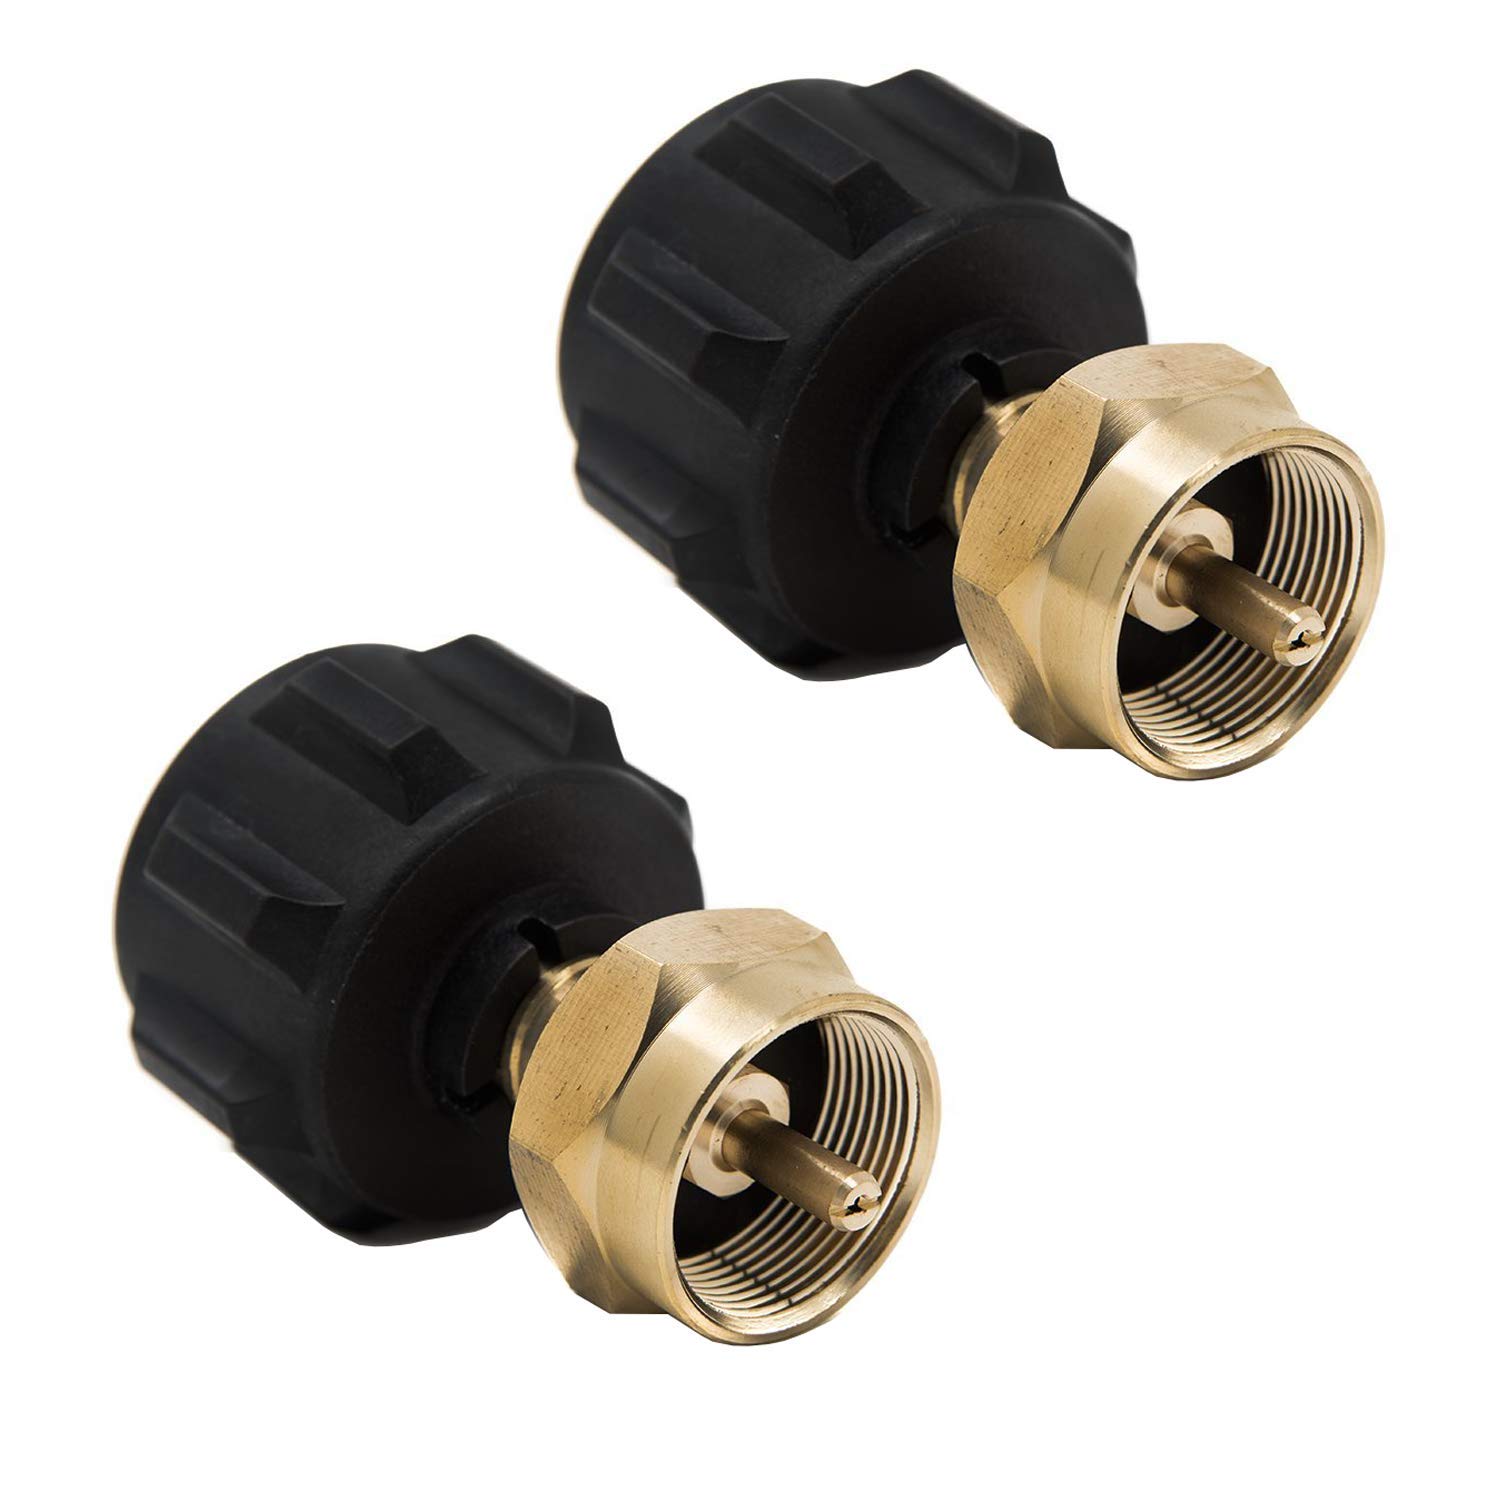 2-Pack GasOne 50180-2 Propane Refill Adapter $9.95 + Free Shipping w/ Prime or on $25+